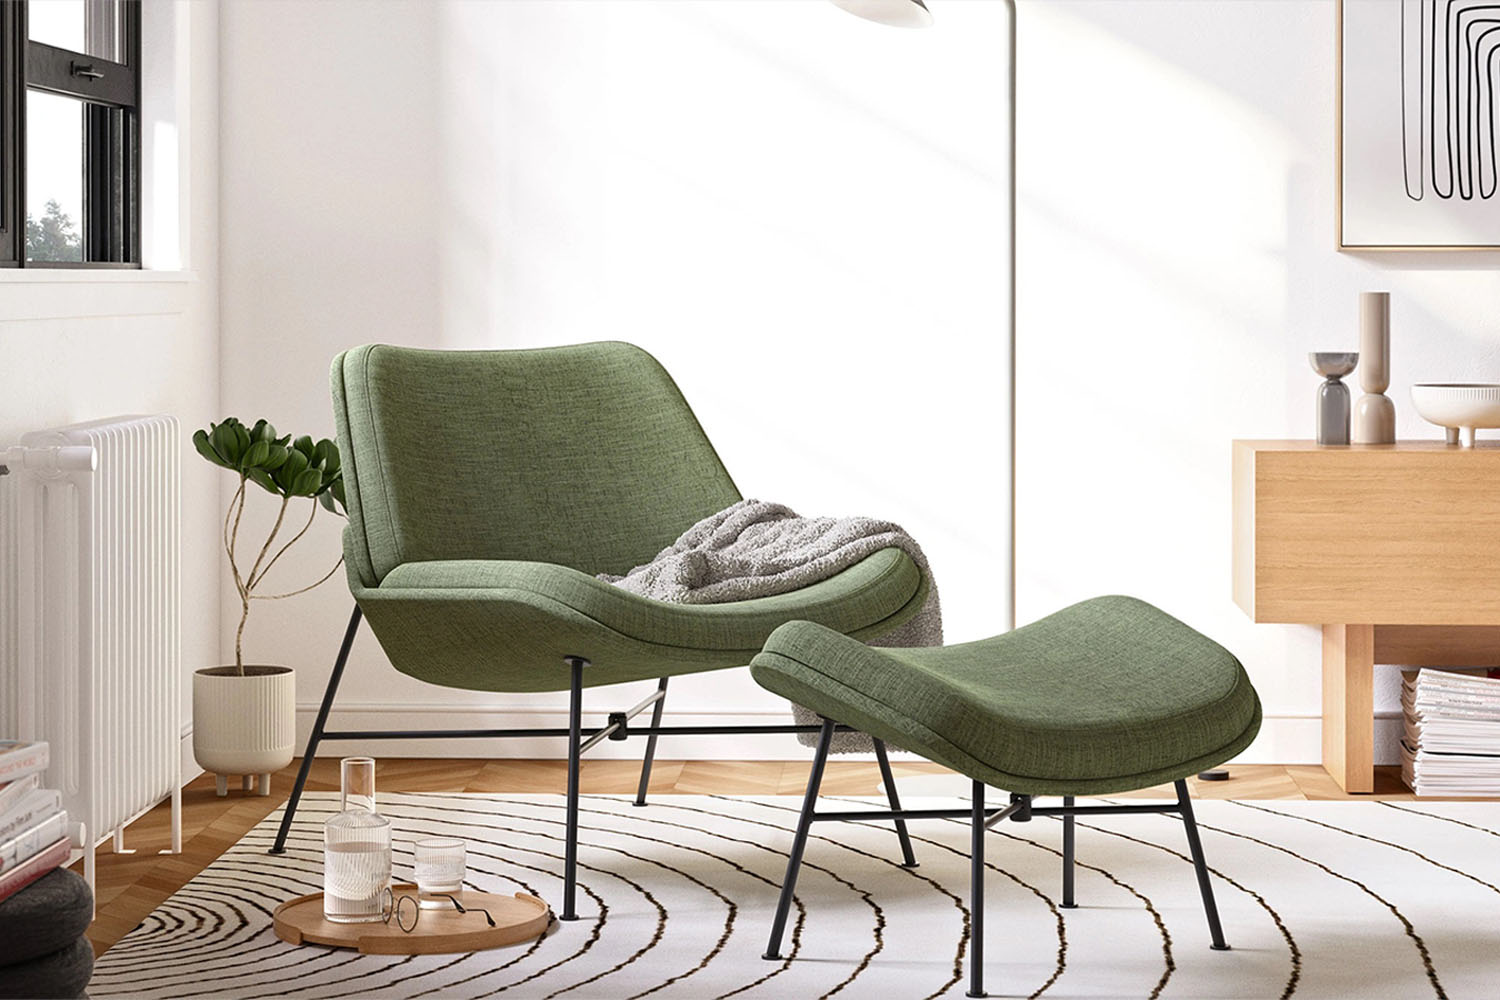 a shot of a green chair and foot stool in a well-furnished room.